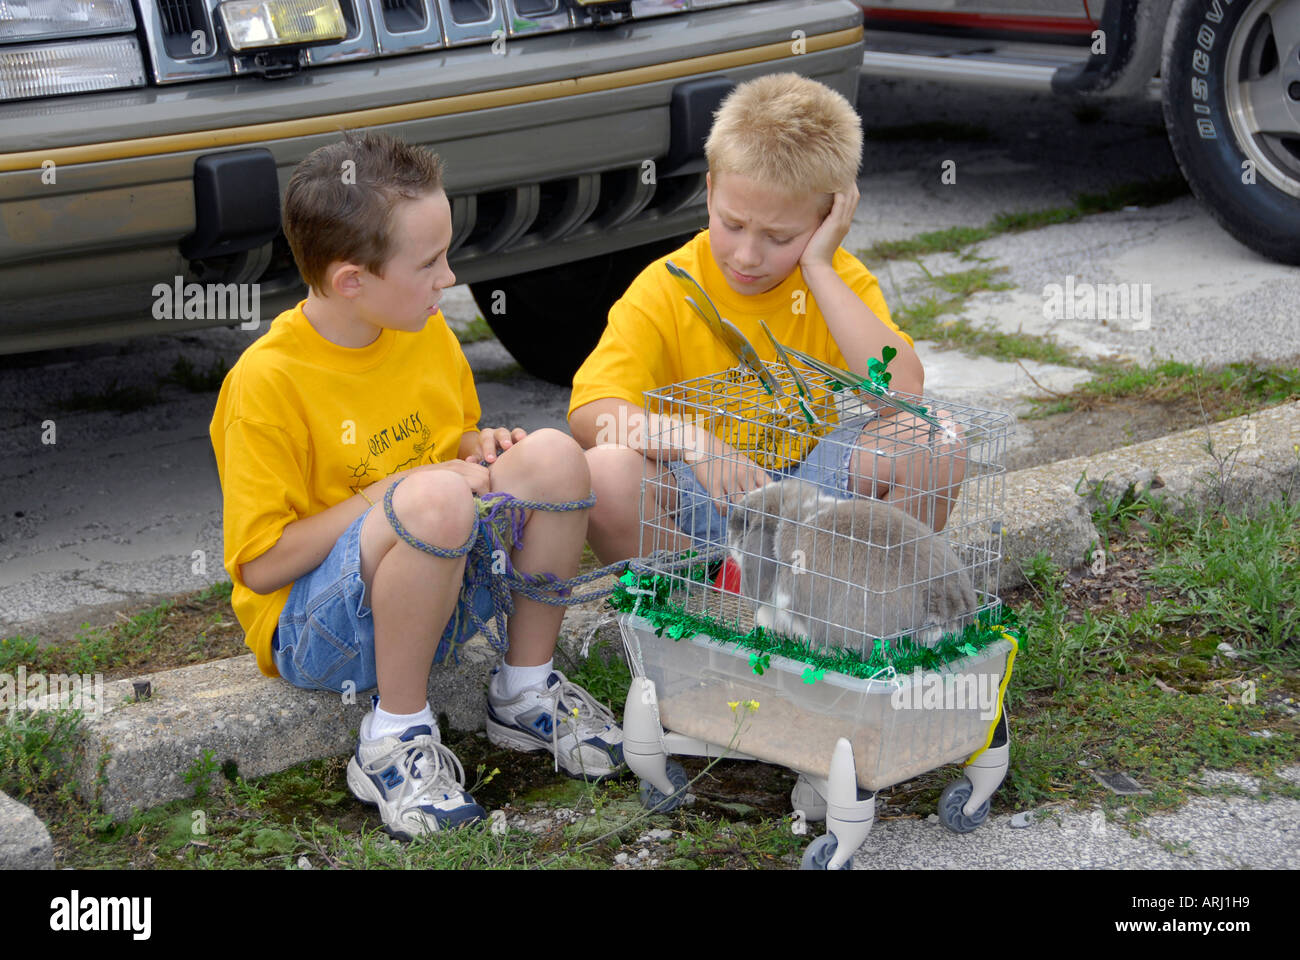 Two boys with a pet rabbit one boy is dejected Stock Photo